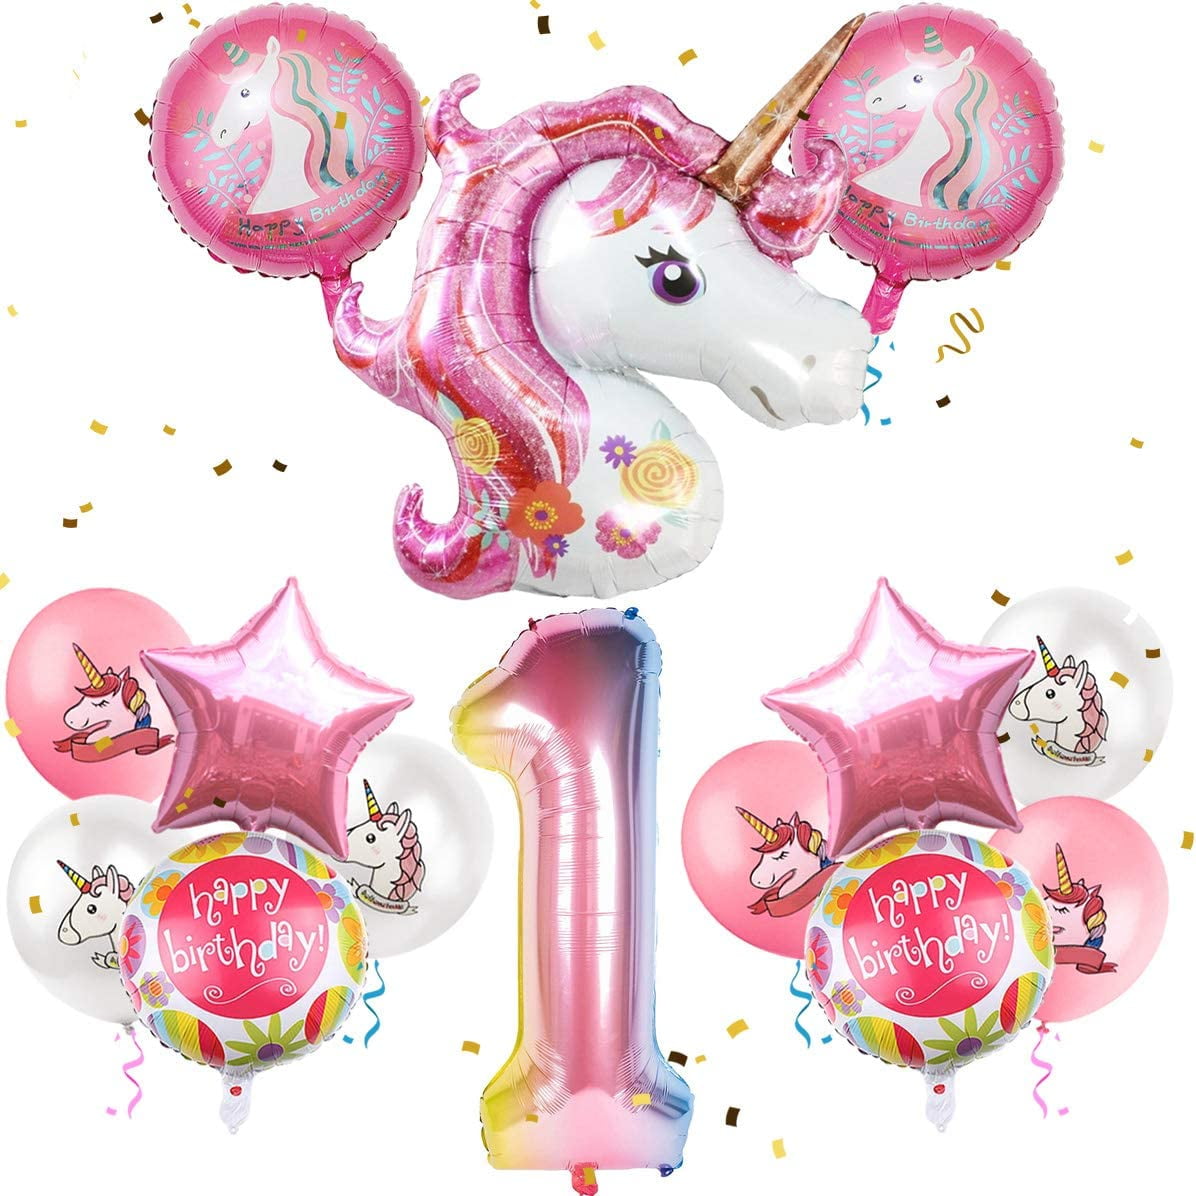 ArcHome Unicorn Balloons Birthday Party Decorations for Girls 4th Party Number4 43 Pink Large Unicorn Gradient Jumbo Number4 Foil Balloon Bouquet Girly Unicorn Theme Party Supplies Backdrop Decor